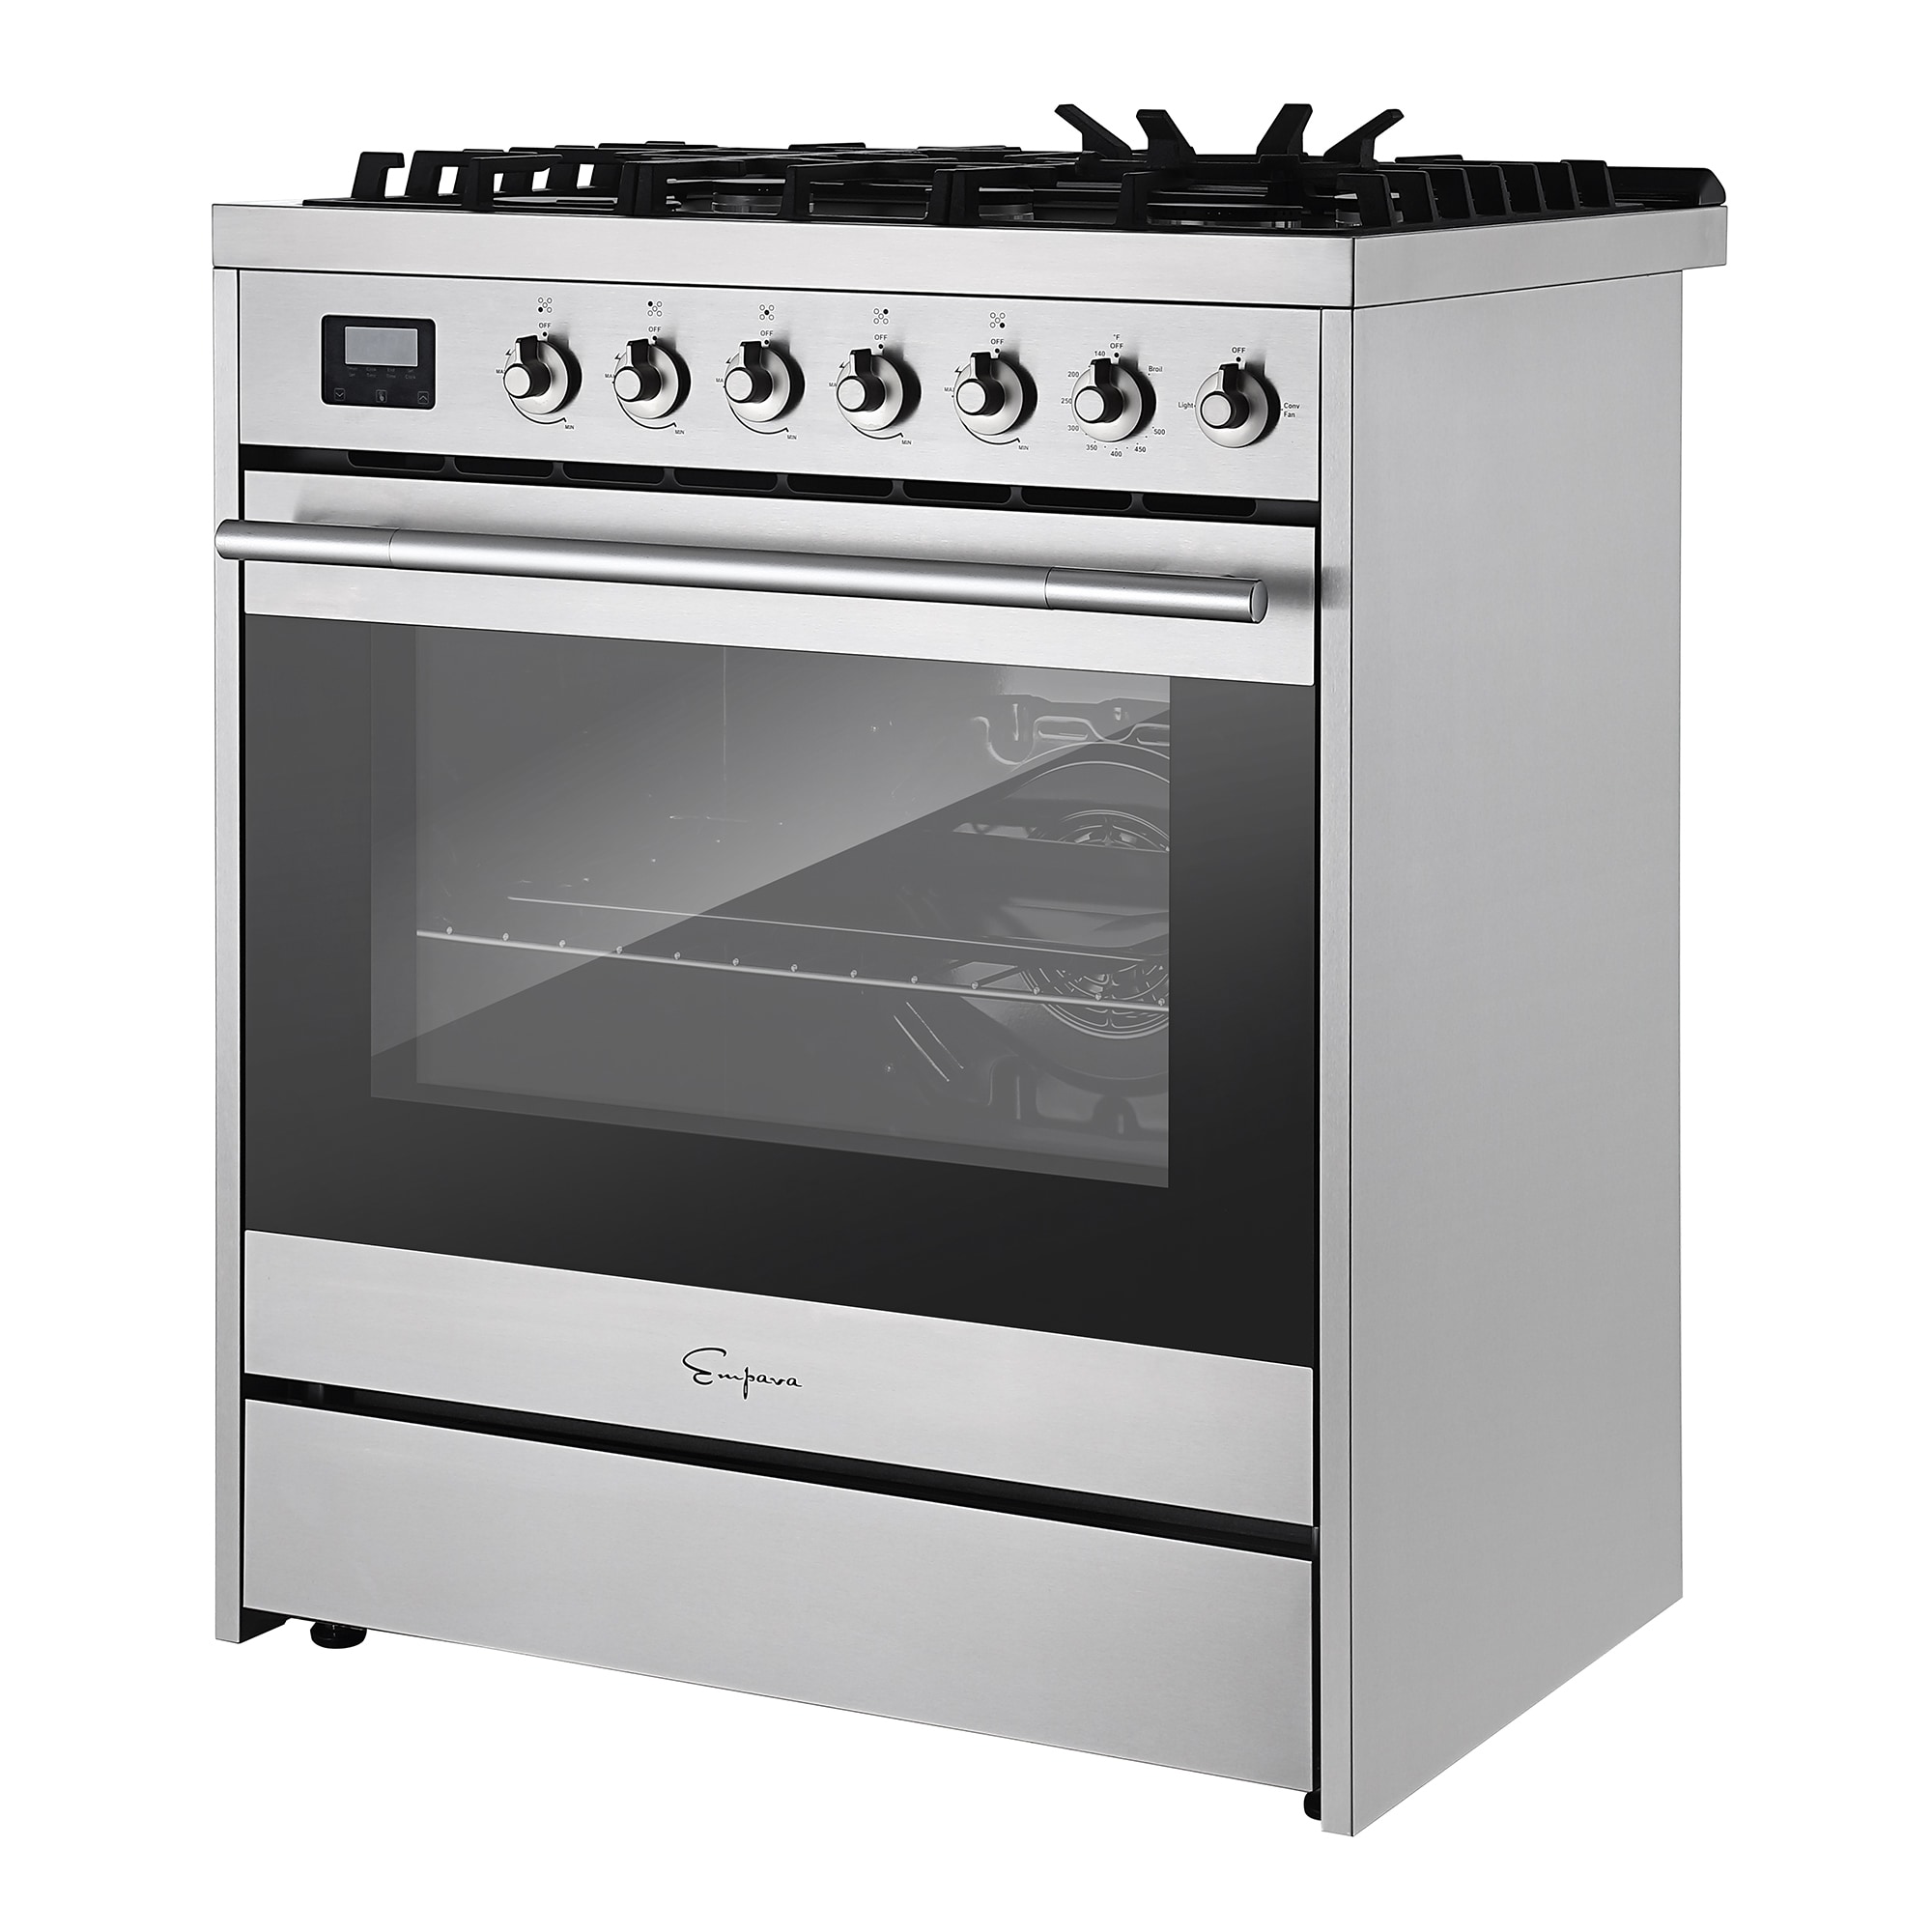  Empava 30 inch Gas Range Stove Freestanding/Slide-in, 4.55 Cu.  Ft. Convection Oven Capacity with Mechanical Knobs Control-Heavy Duty Cast  Iron Grates 5 Sealed Burners,Stainless Steel : Appliances